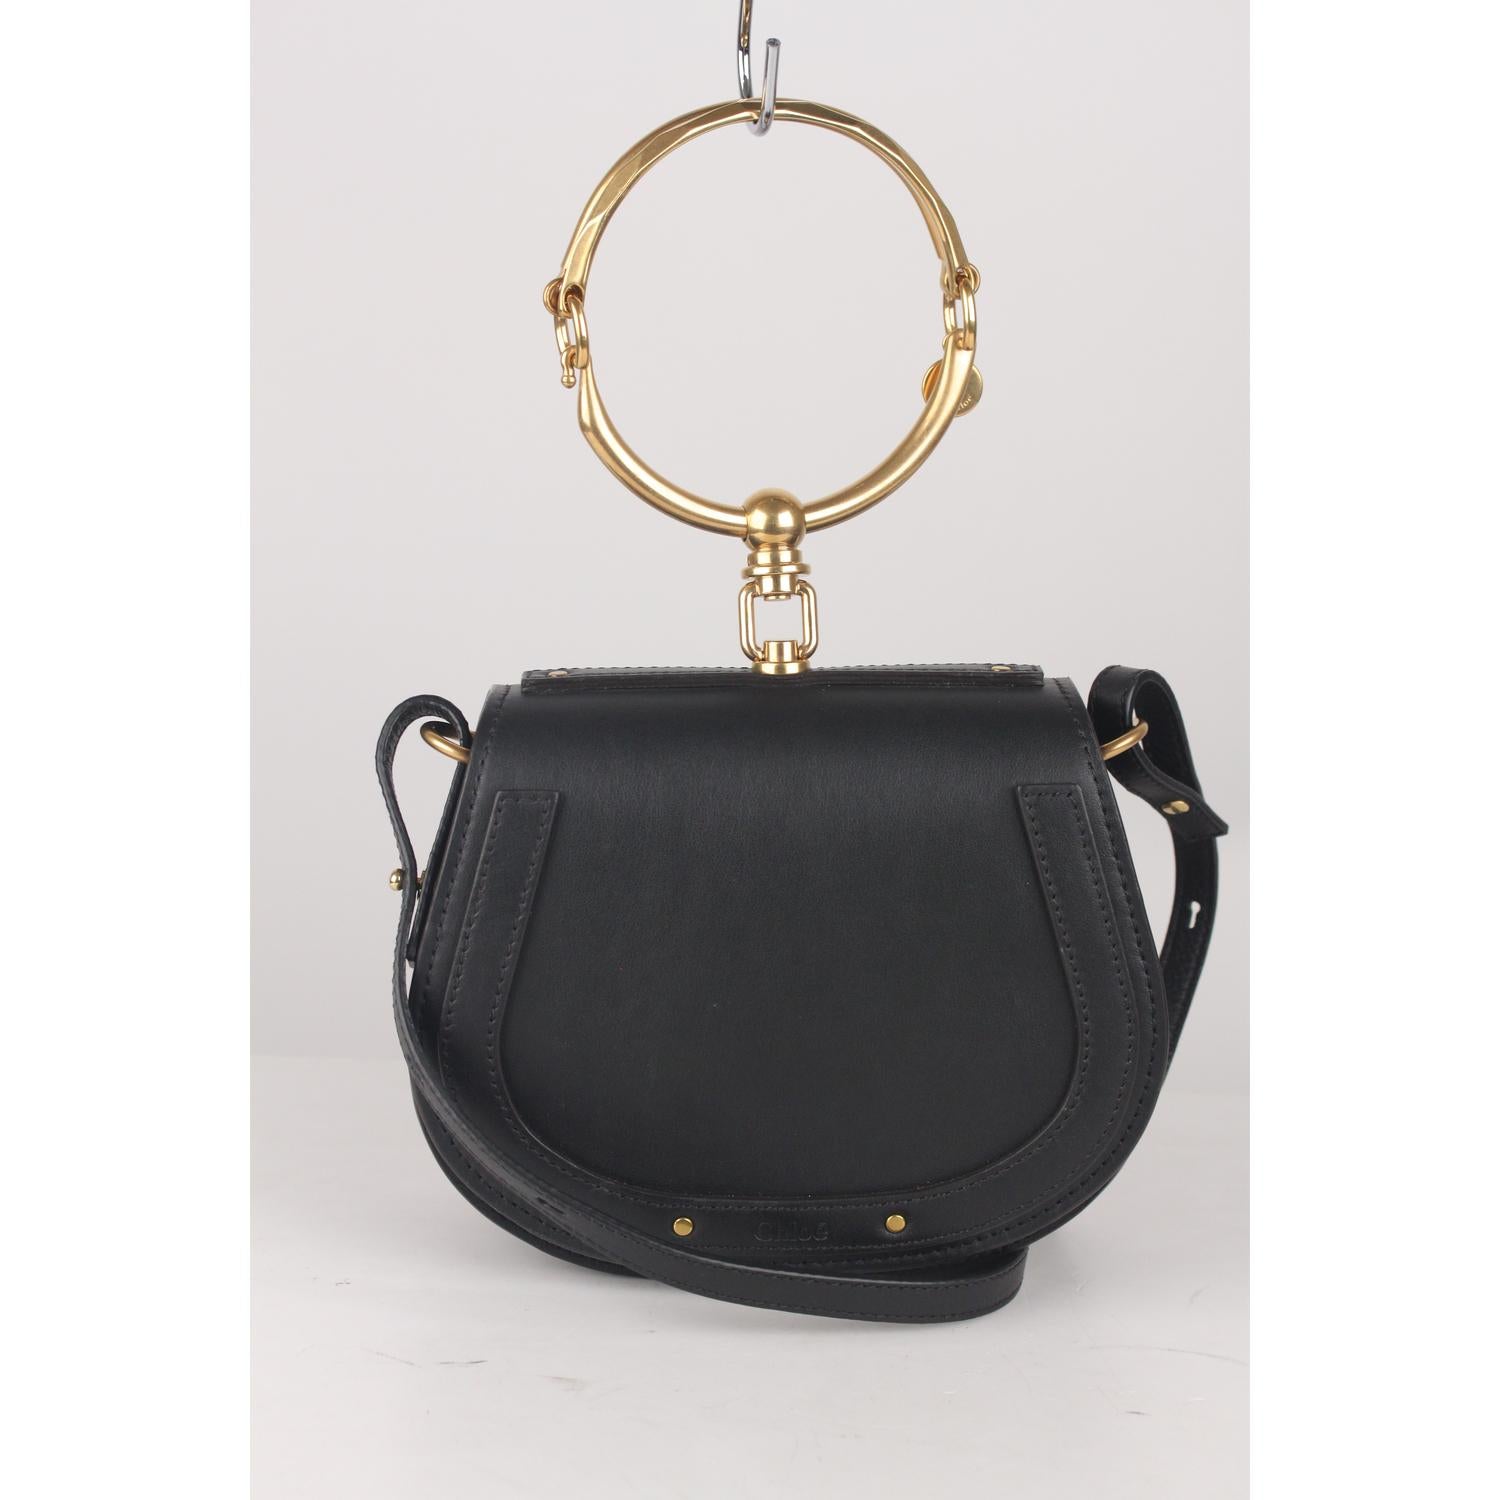 We offer Certificate of Authenticity provided by Entrupy for this item at no further cost.

Chloé's 'Nile' bracelet bag. Crafted of black leather and suede. A beautiful day-to-evening bag from the Chloe 2017 summer collection. It feautures CHLOE'